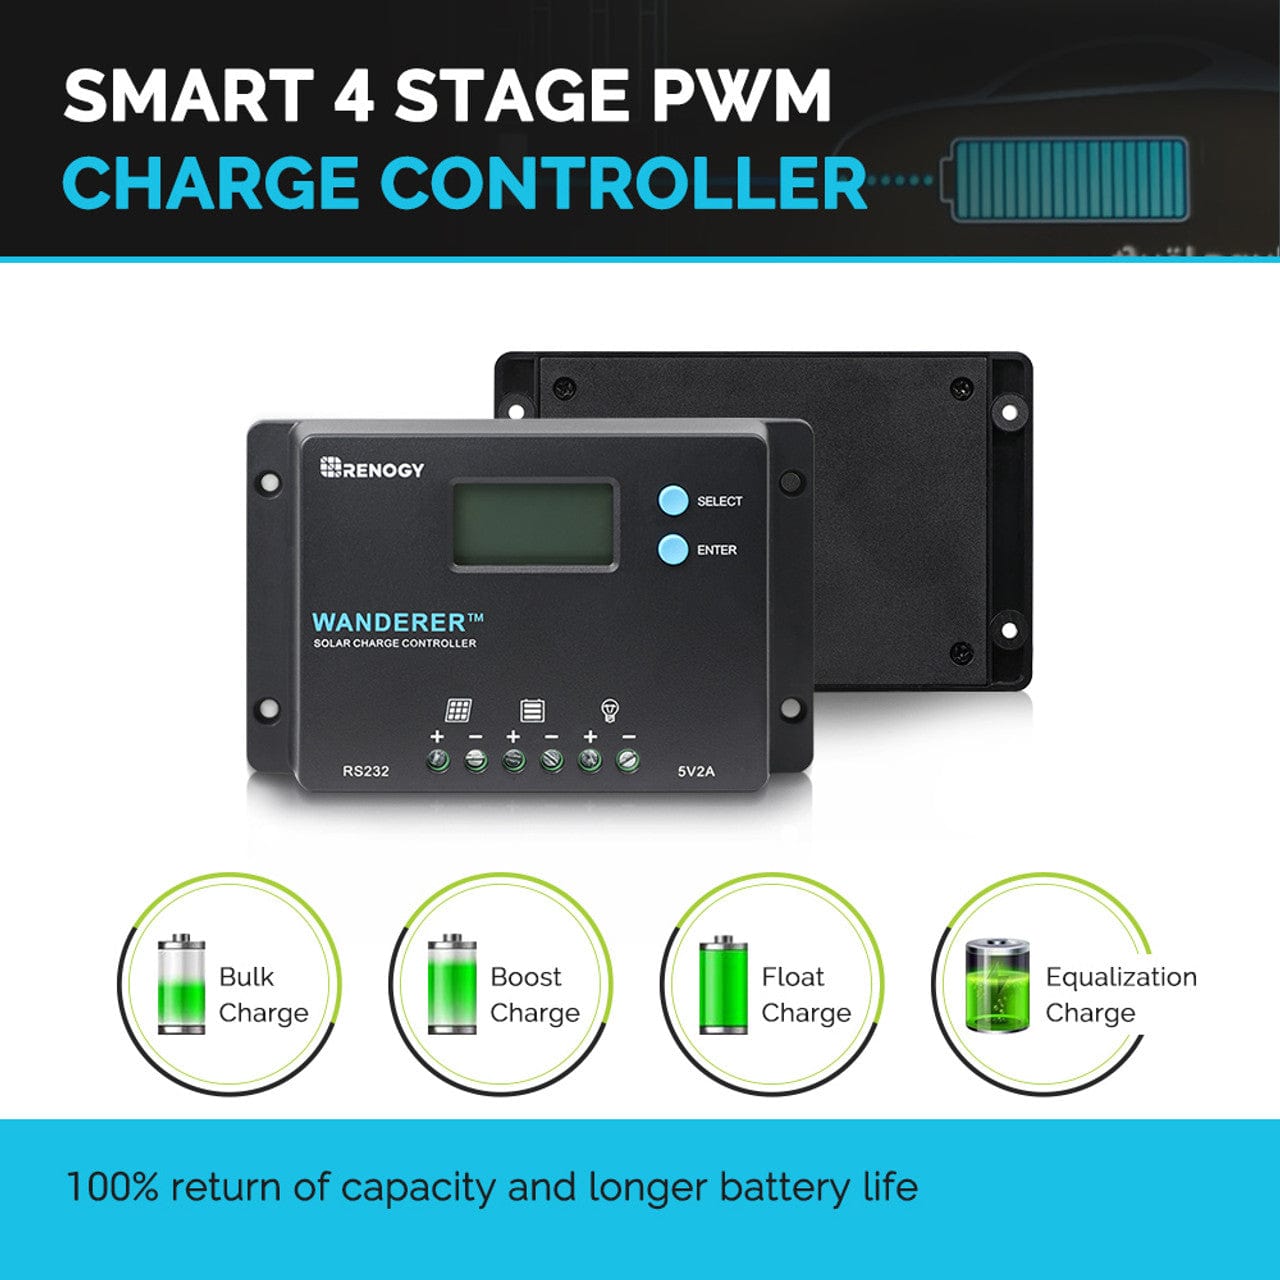 Wanderer 10A PWM Charge Controller Charge Controller